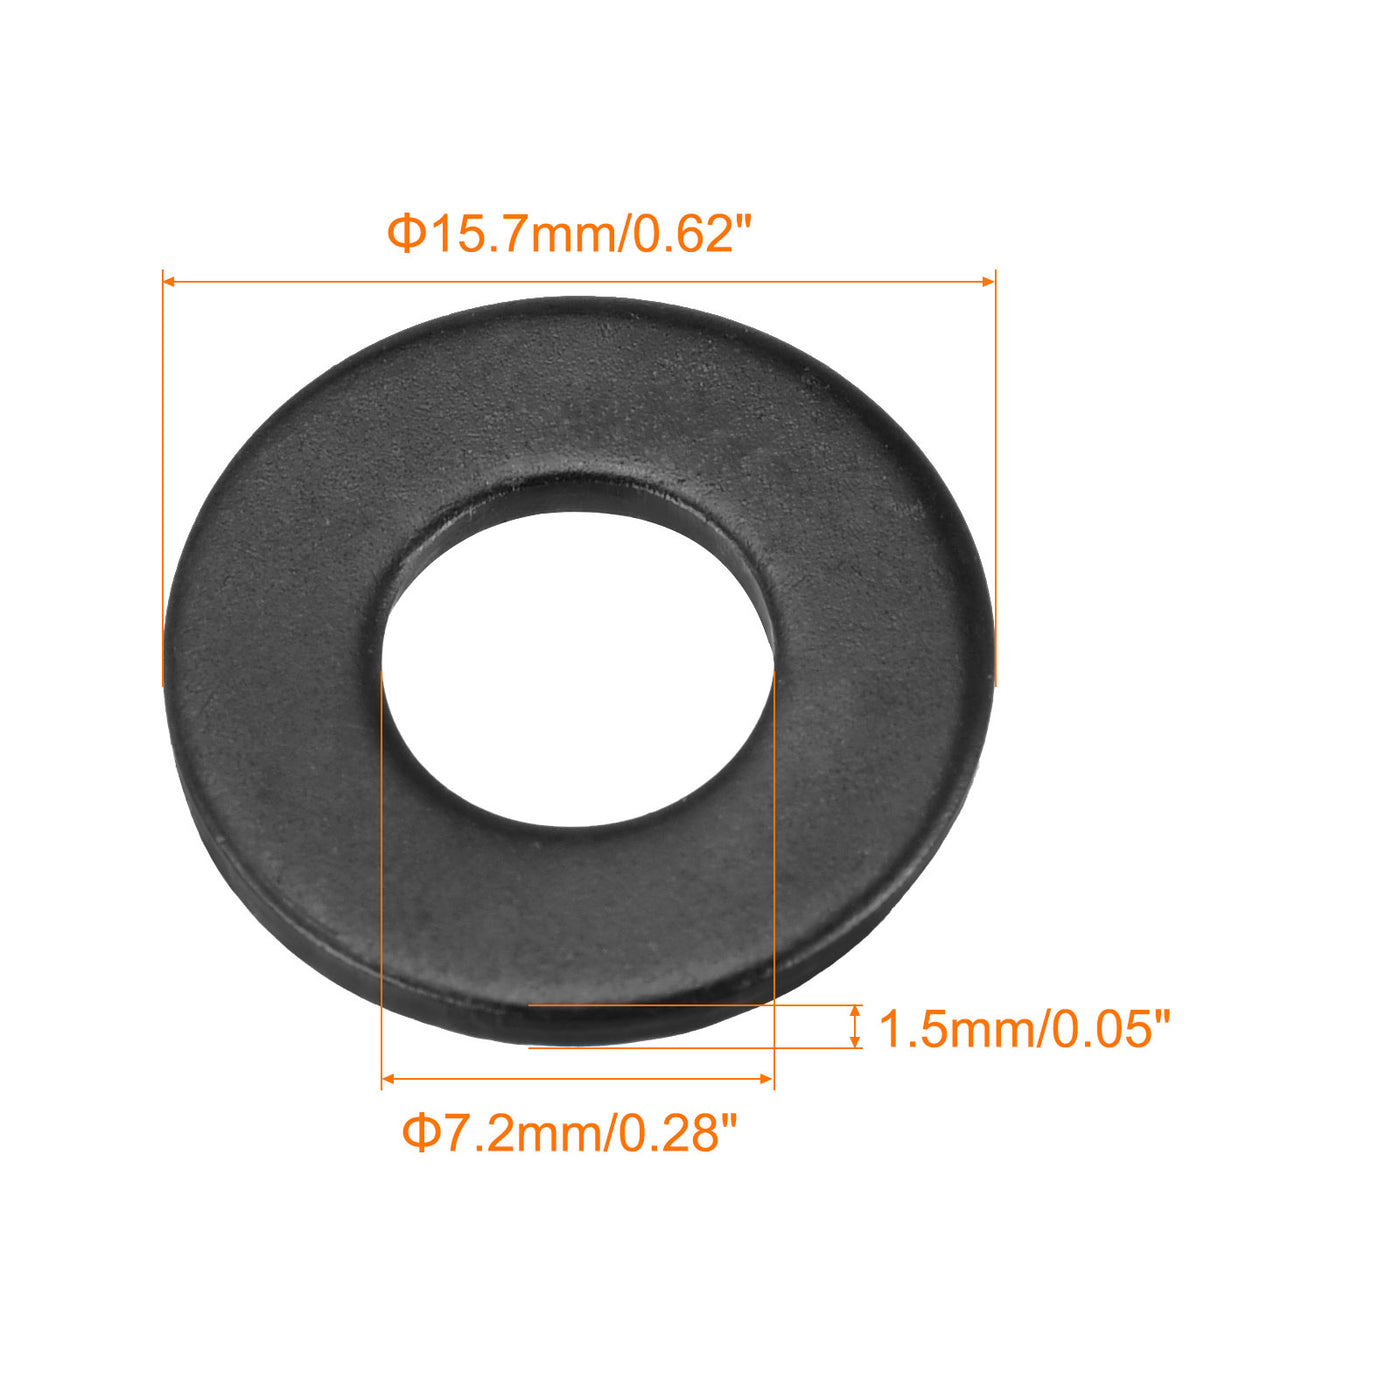 uxcell Uxcell 1/4-Inch Flat Washer, Alloy Steel Black Oxide Finish Pack of 50